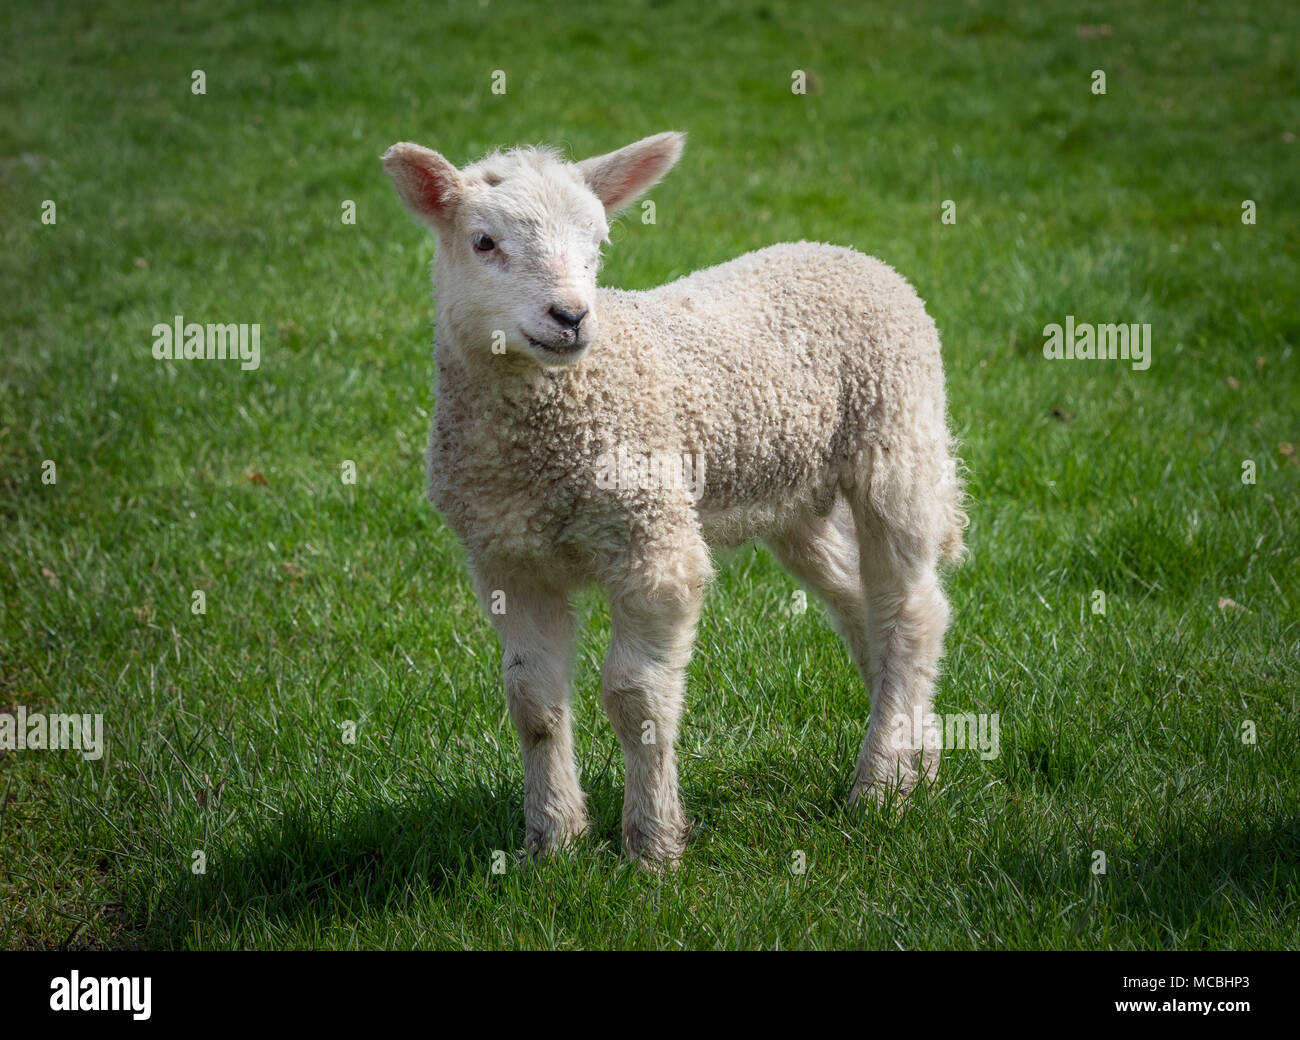 Seul lamb standing in field Banque D'Images